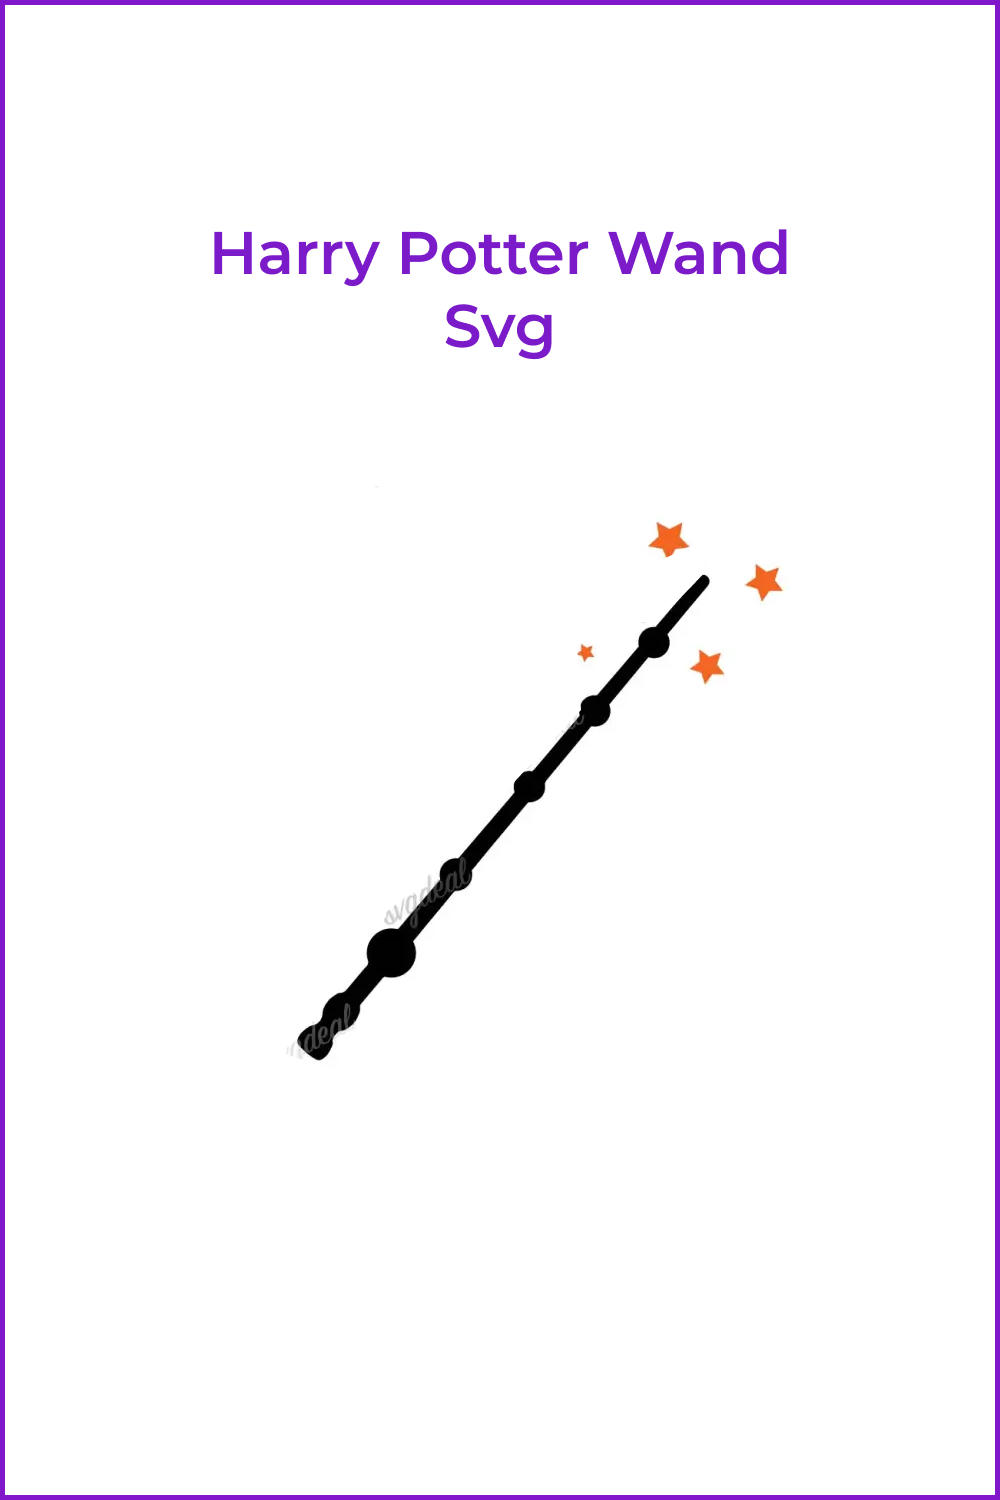 Image of an elder wand with asterisks.